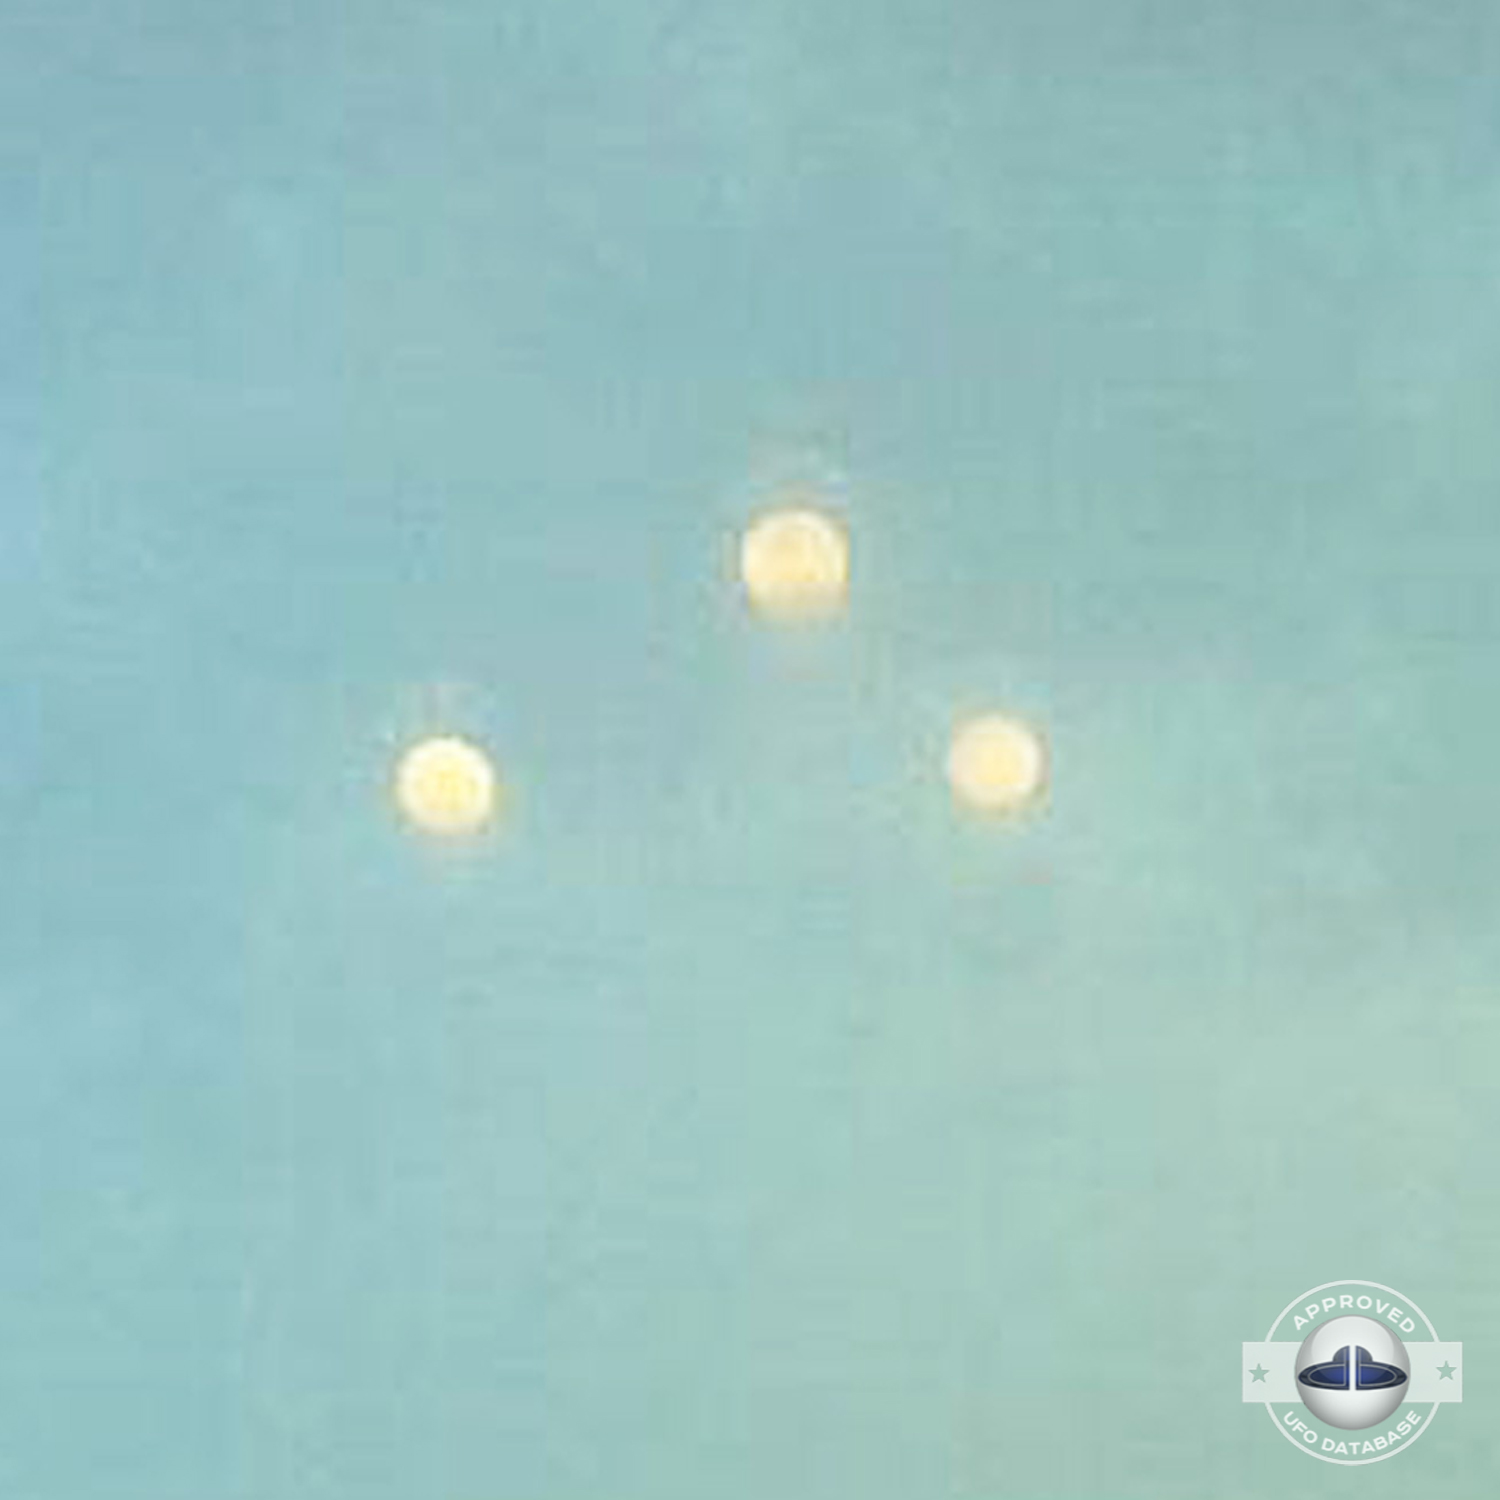 Citizens of Leshan saw 3 illuminated spherical shaped UFO in the sky UFO Picture #158-3